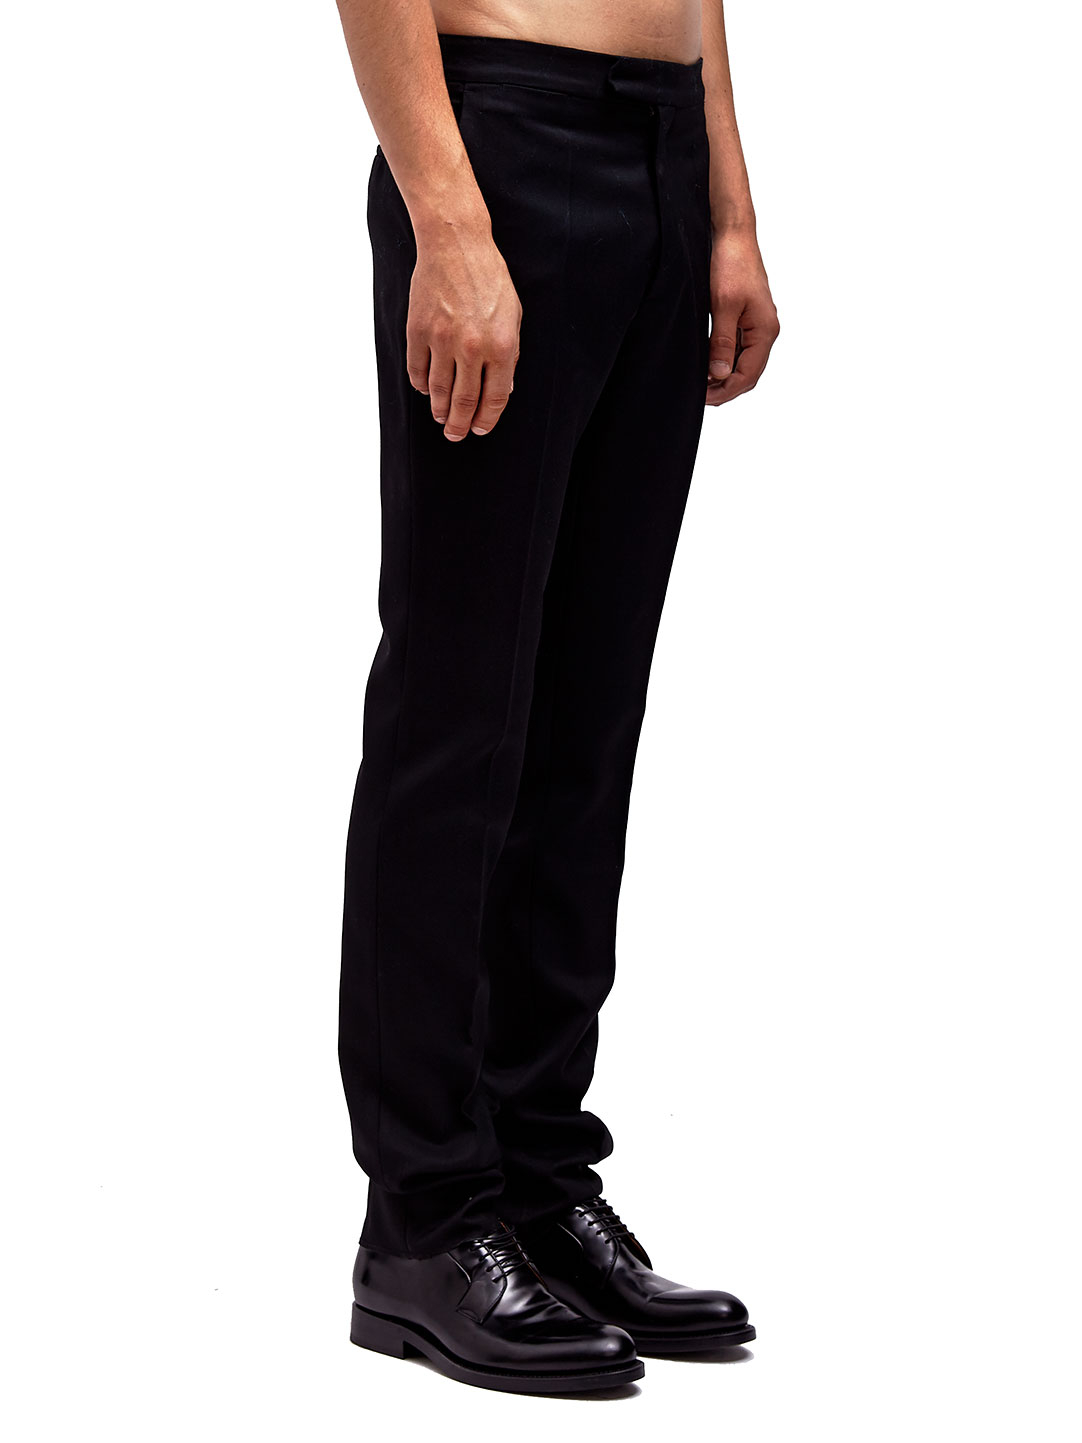 Lyst - Raf Simons / Sterling Ruby Mens Classic Fit Pants in Black for Men